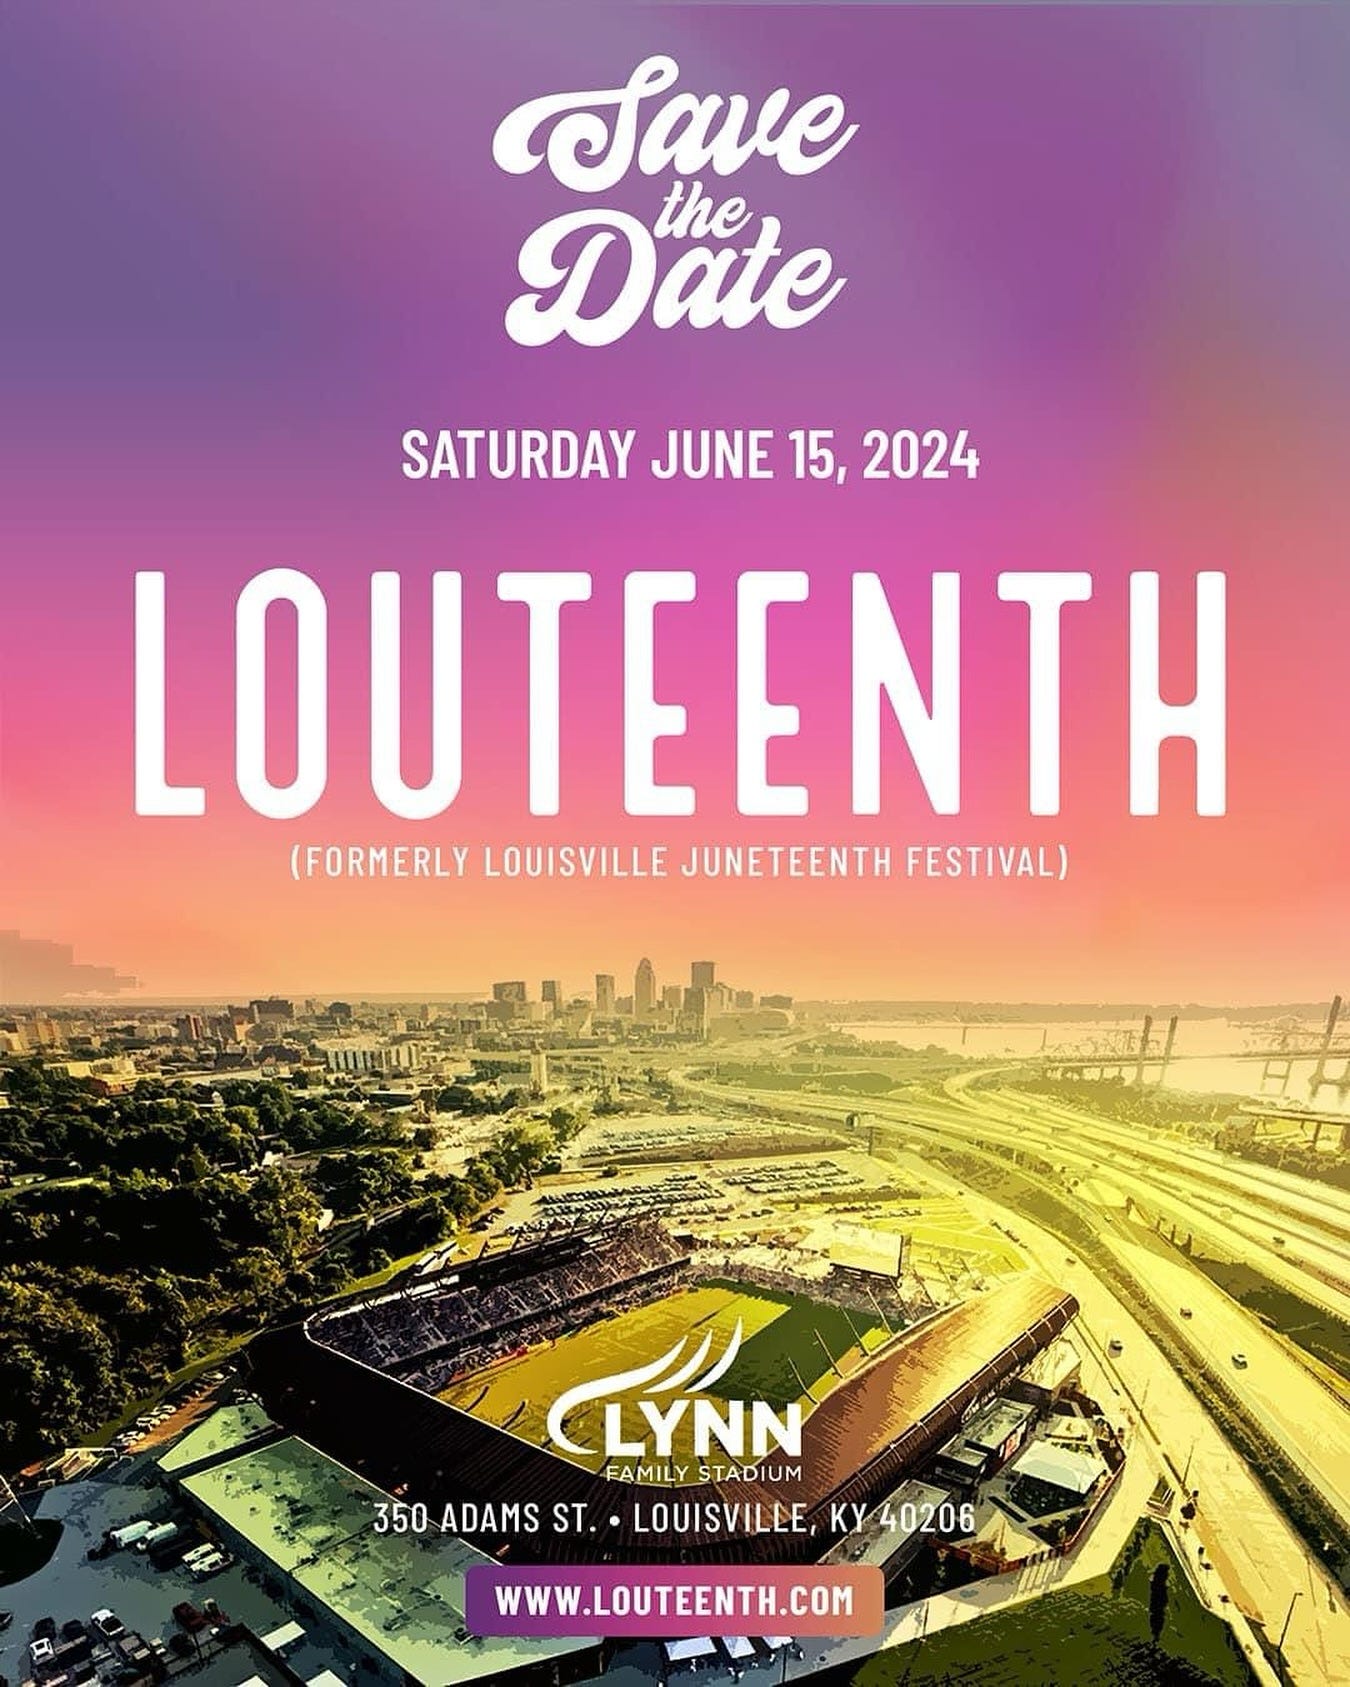 May be an image of text that says '3 Date the SATURDAY JUNE 15, 2024 LOUTEENTH (FORMERLY LOUISVILLE JUNETEENTH FESTIVAL) CLYNN FAMILYSTADIUM UM FAMILY STAD 350 ADAMS ST. LOUISVILLE, KY 40206 WWW.LOUTEENTH.COM'